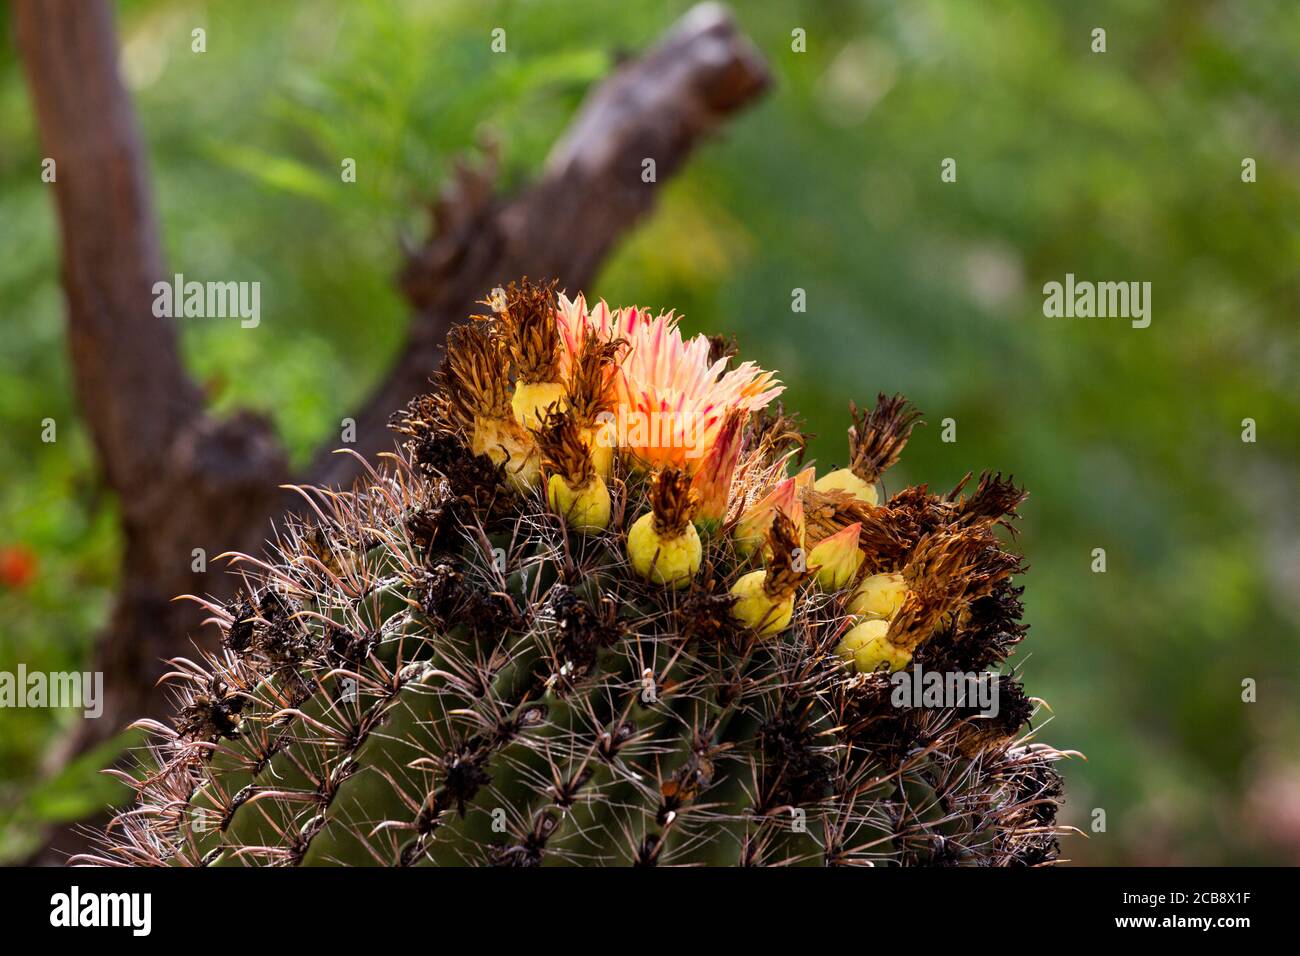 Barrel cactus has yellow fruit and orange red blossoms during summer monsoon season in the American Southwest.  Location is Tucson, Arizona. Stock Photo